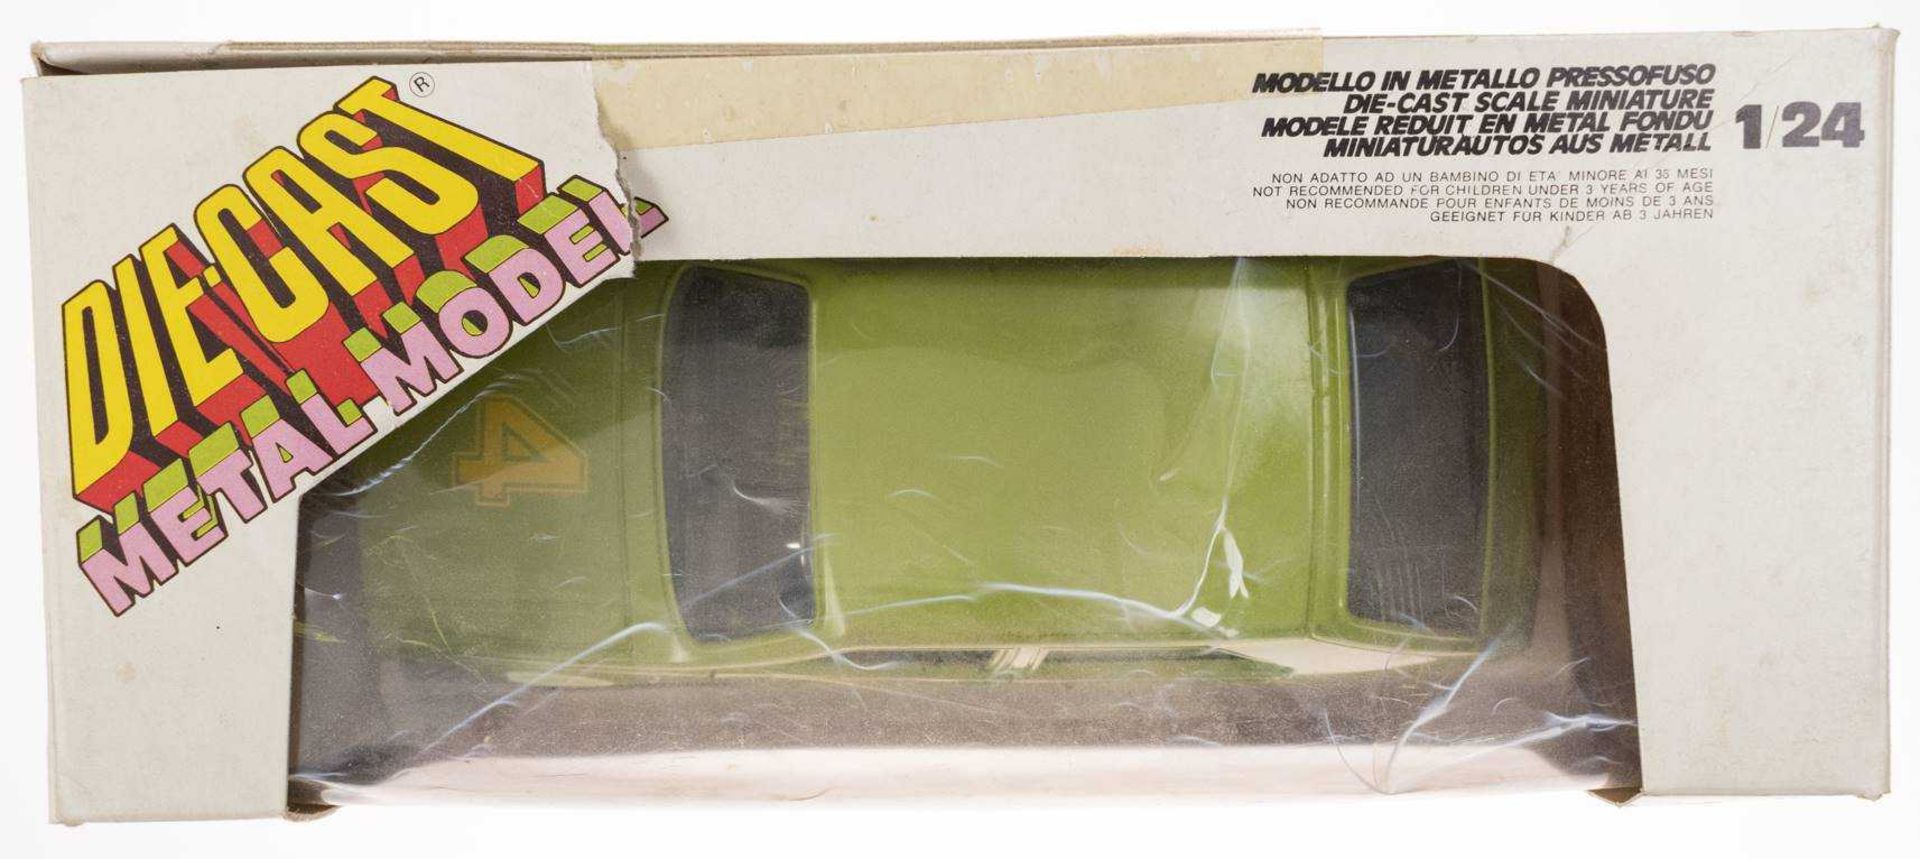 RENAULT 14 TL green with liftoff no. 4, perfect in old rainbow original packaging (these Mgl) - Image 2 of 3